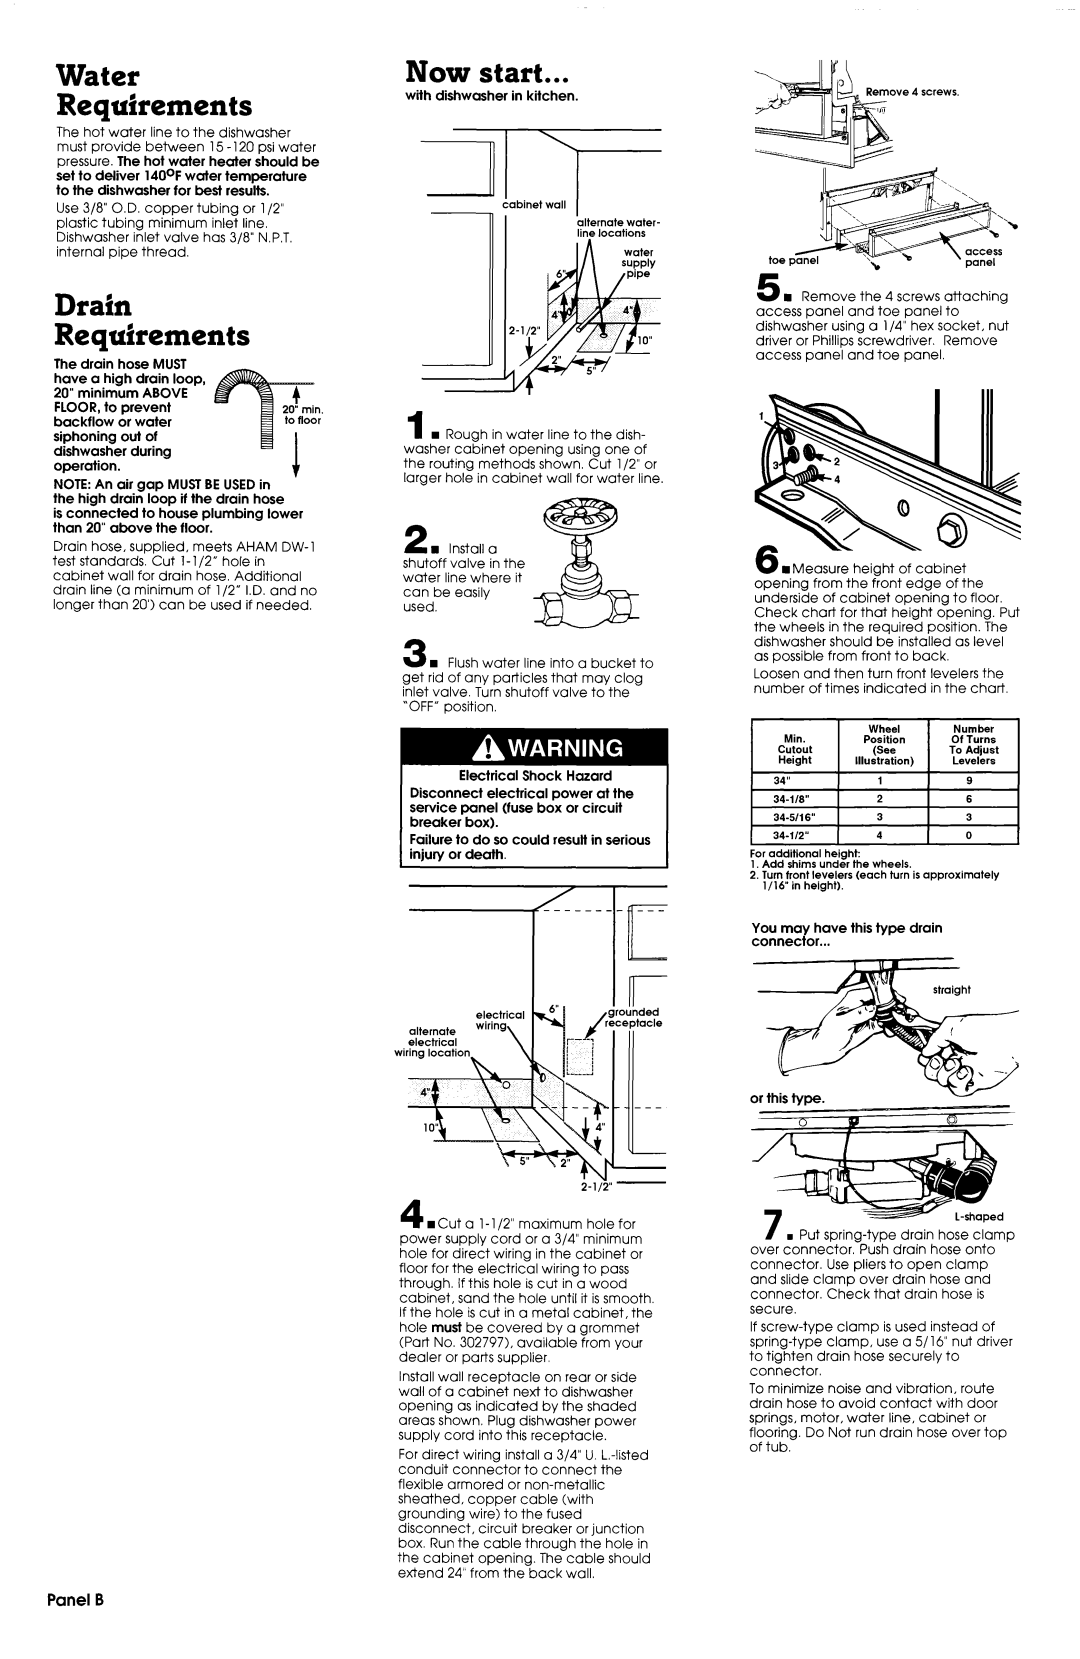 Whirlpool 3374369 installation instructions Water Requirements, Drain Requirements, Now start, Panel B 